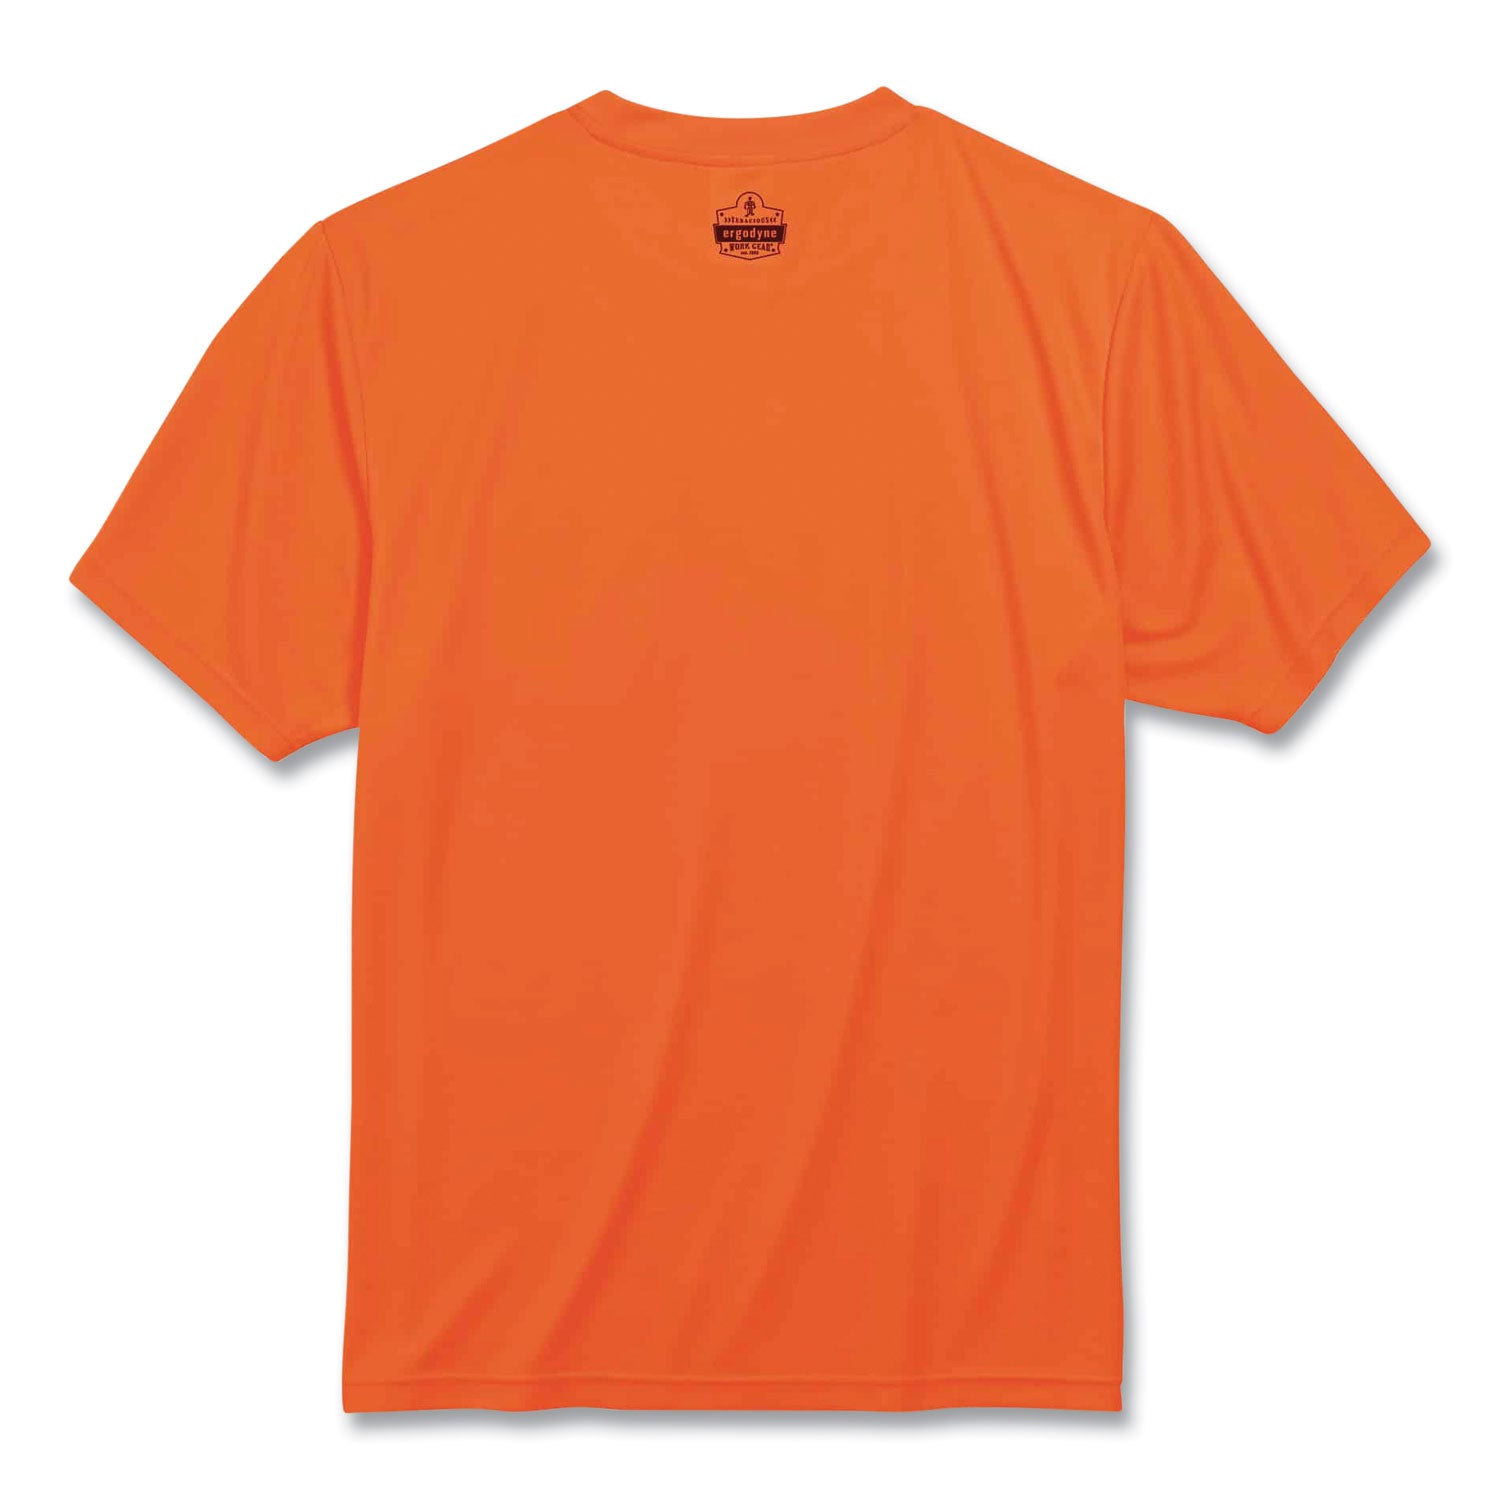 glowear-8089-non-certified-hi-vis-t-shirt-polyester-small-orange-ships-in-1-3-business-days_ego21562 - 2